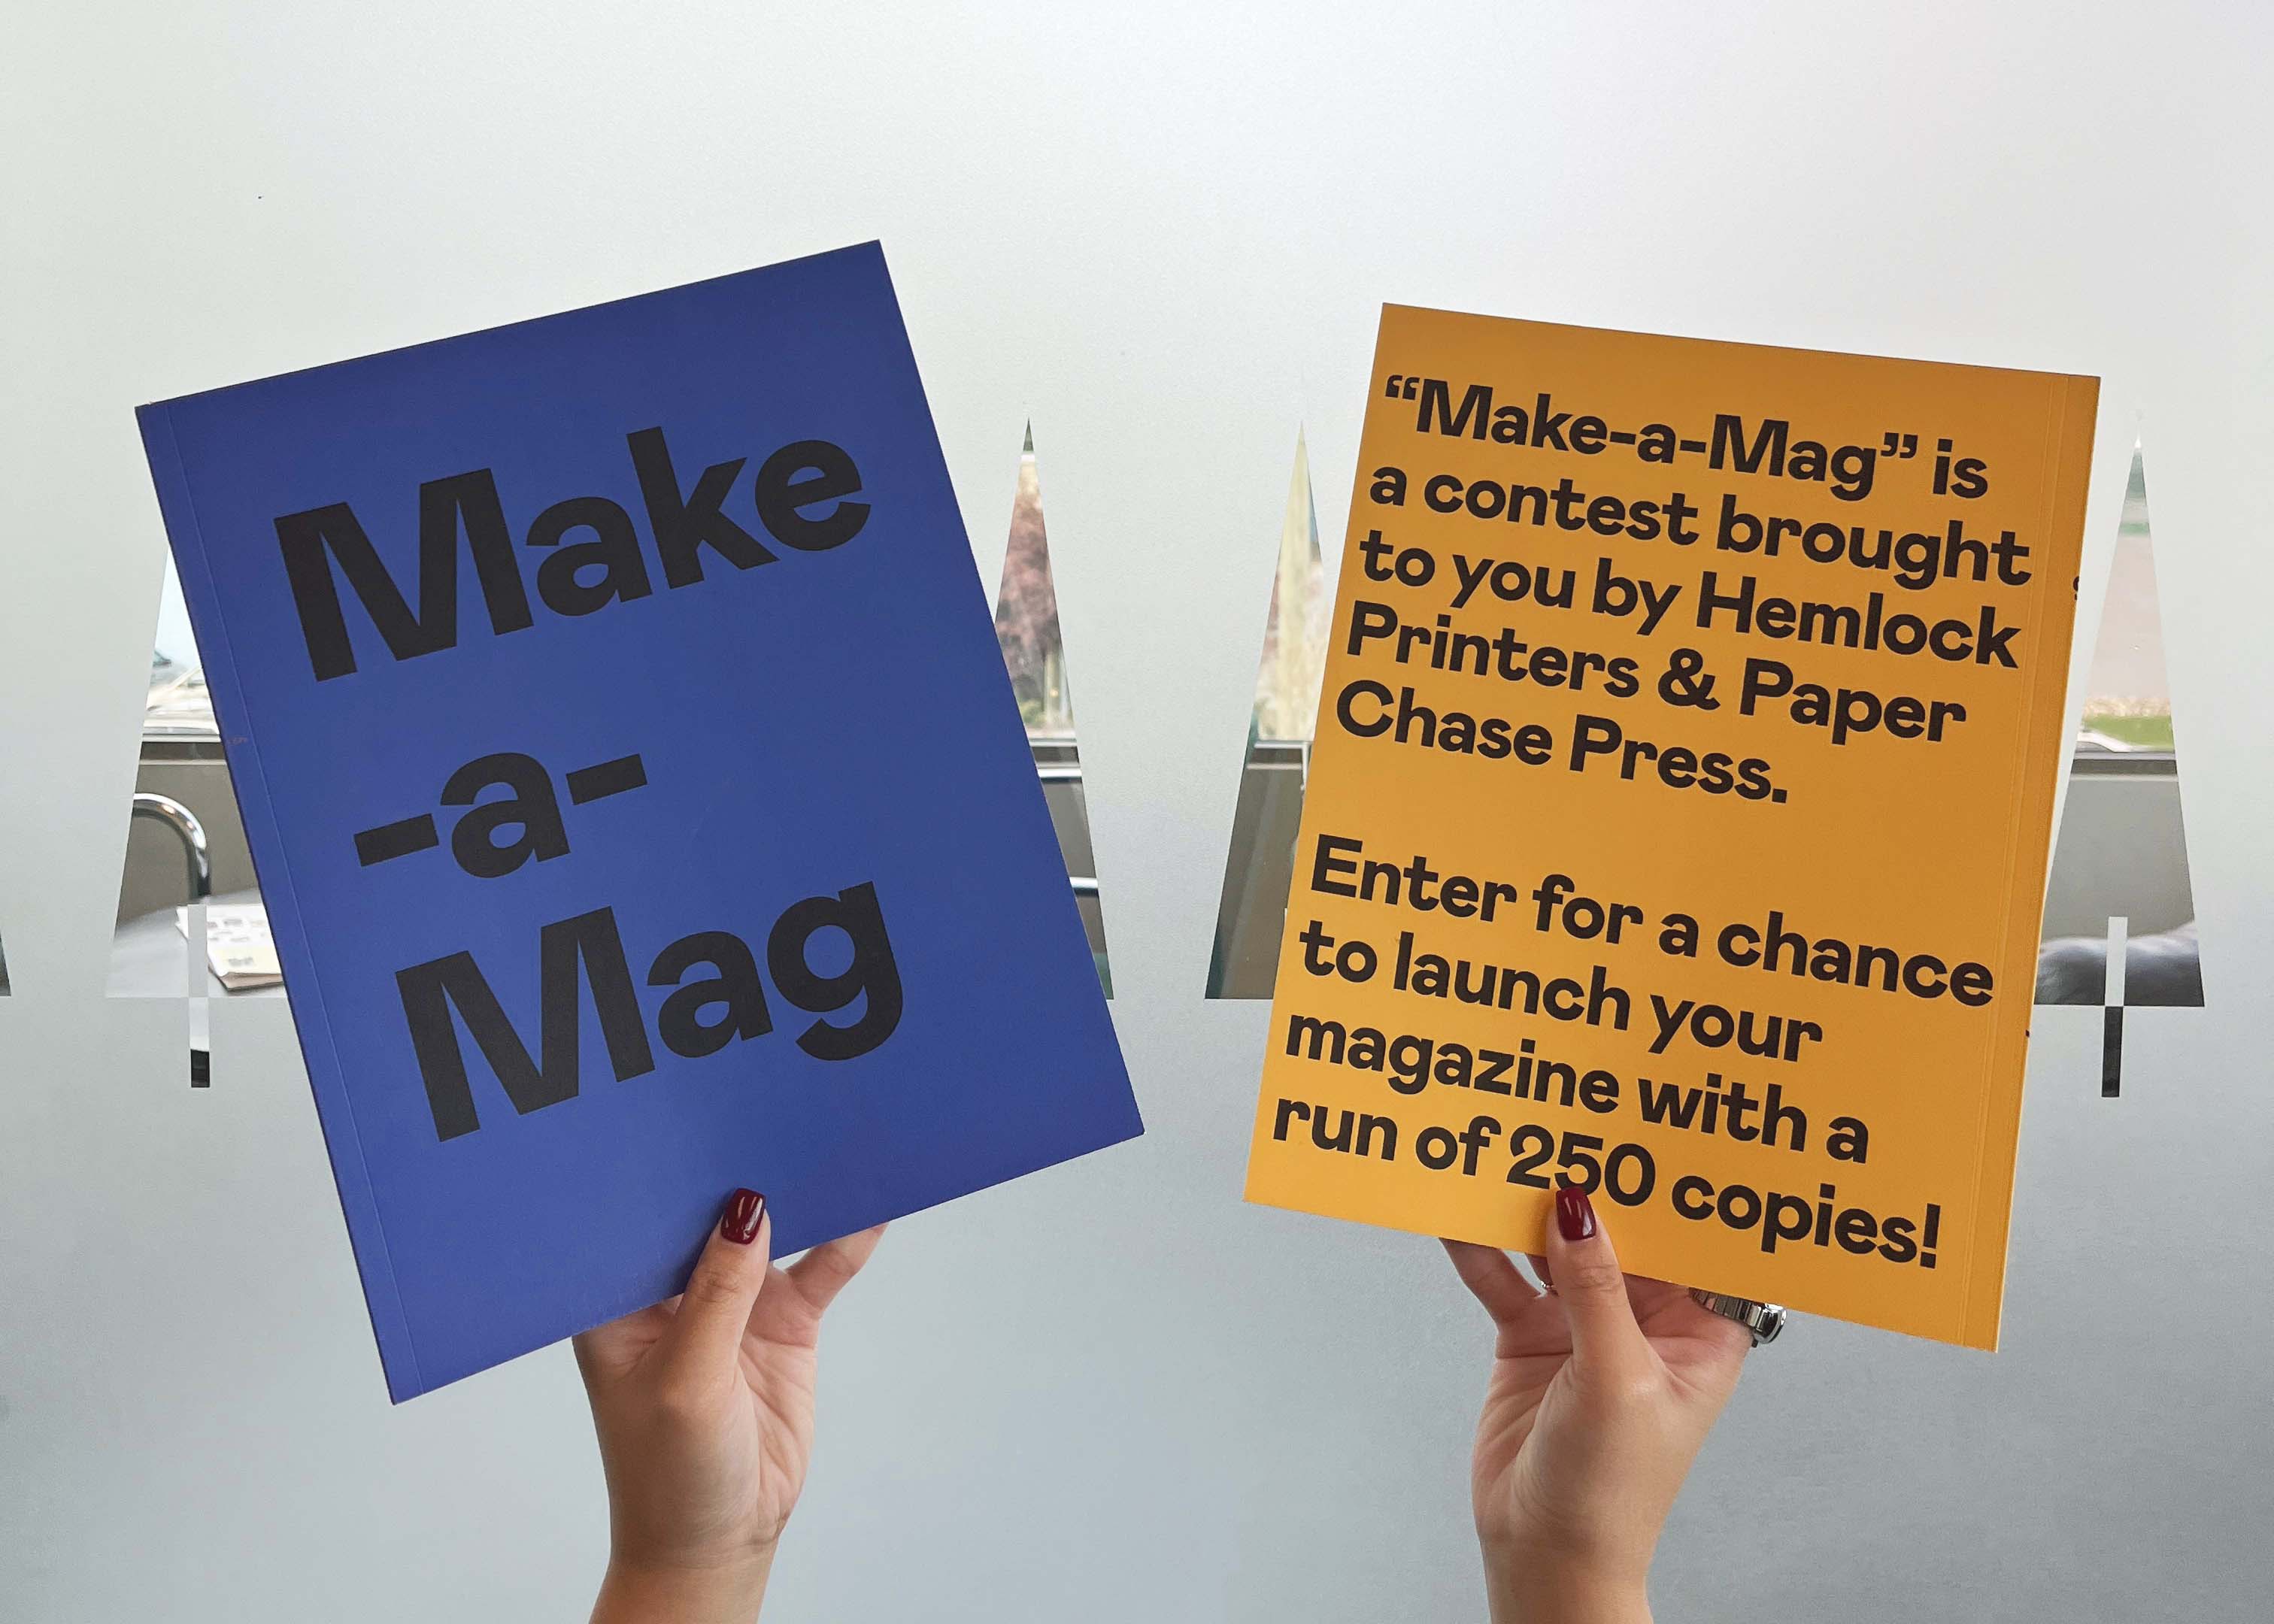 Make-a-Mag contest information